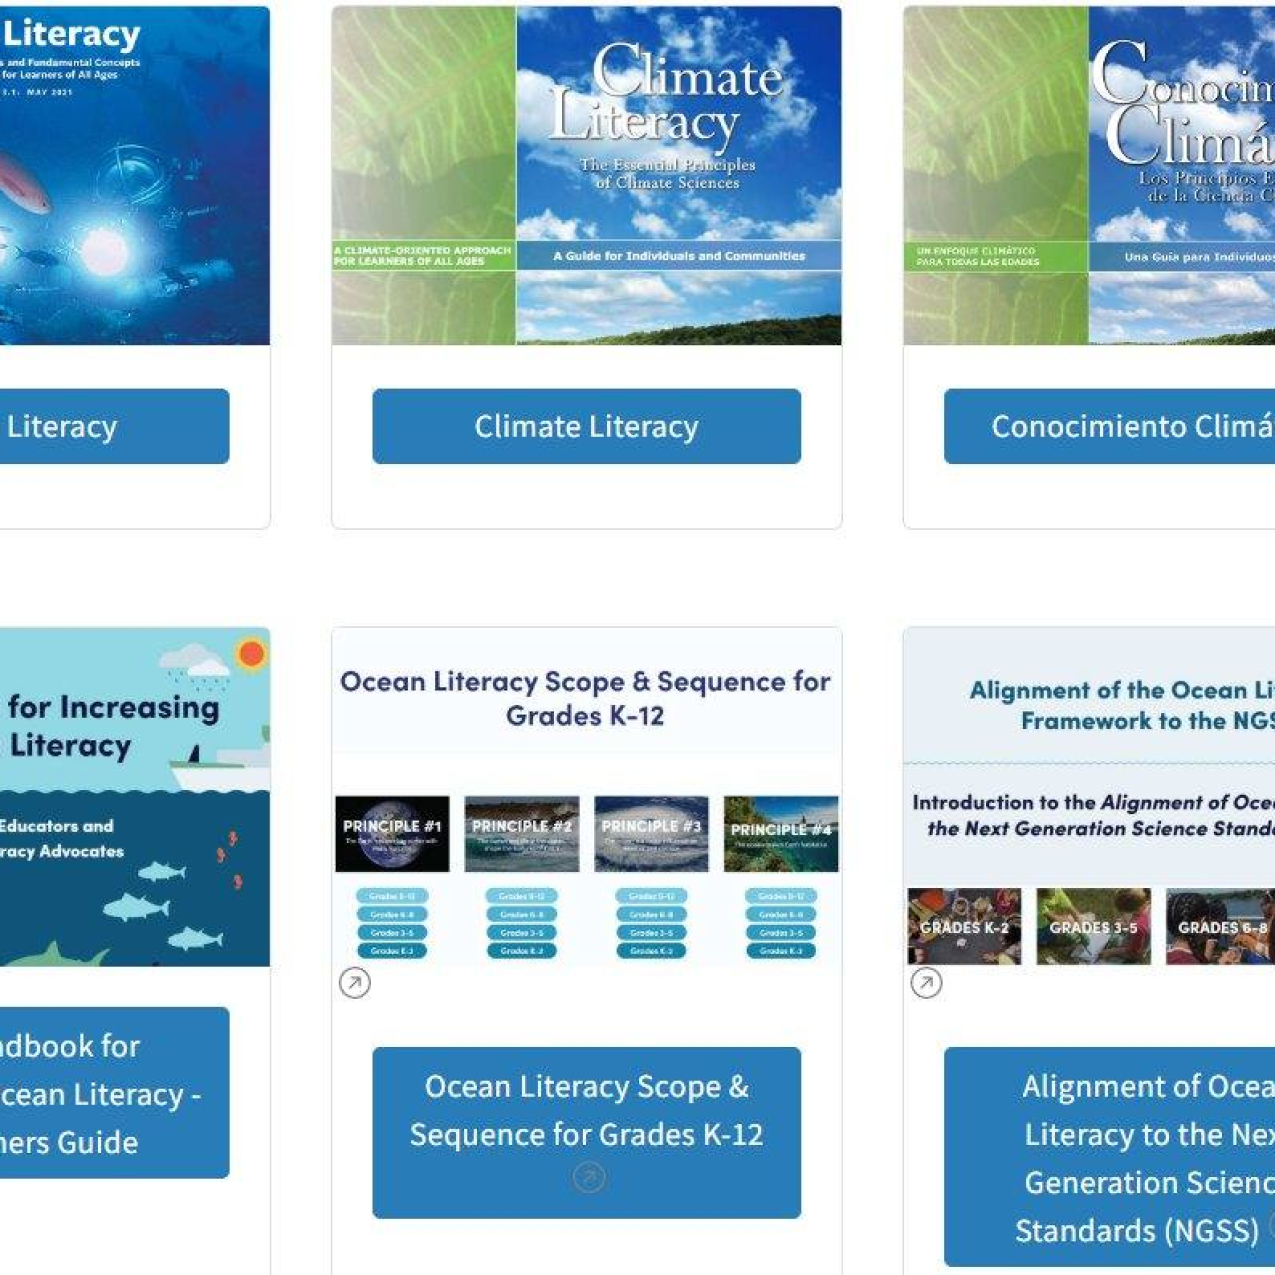 A screenshot from a website showing documents that you can download, including Ocean Literacy, Climate Literacy, Conocimiento Climatico, The Handbook for Increasing Ocean Literacy - Practitioners Guide, Ocean Literacy Scope and Sequence for Grades K-12, and Alignment of Ocean Literacy to the Next Generation Science Standards